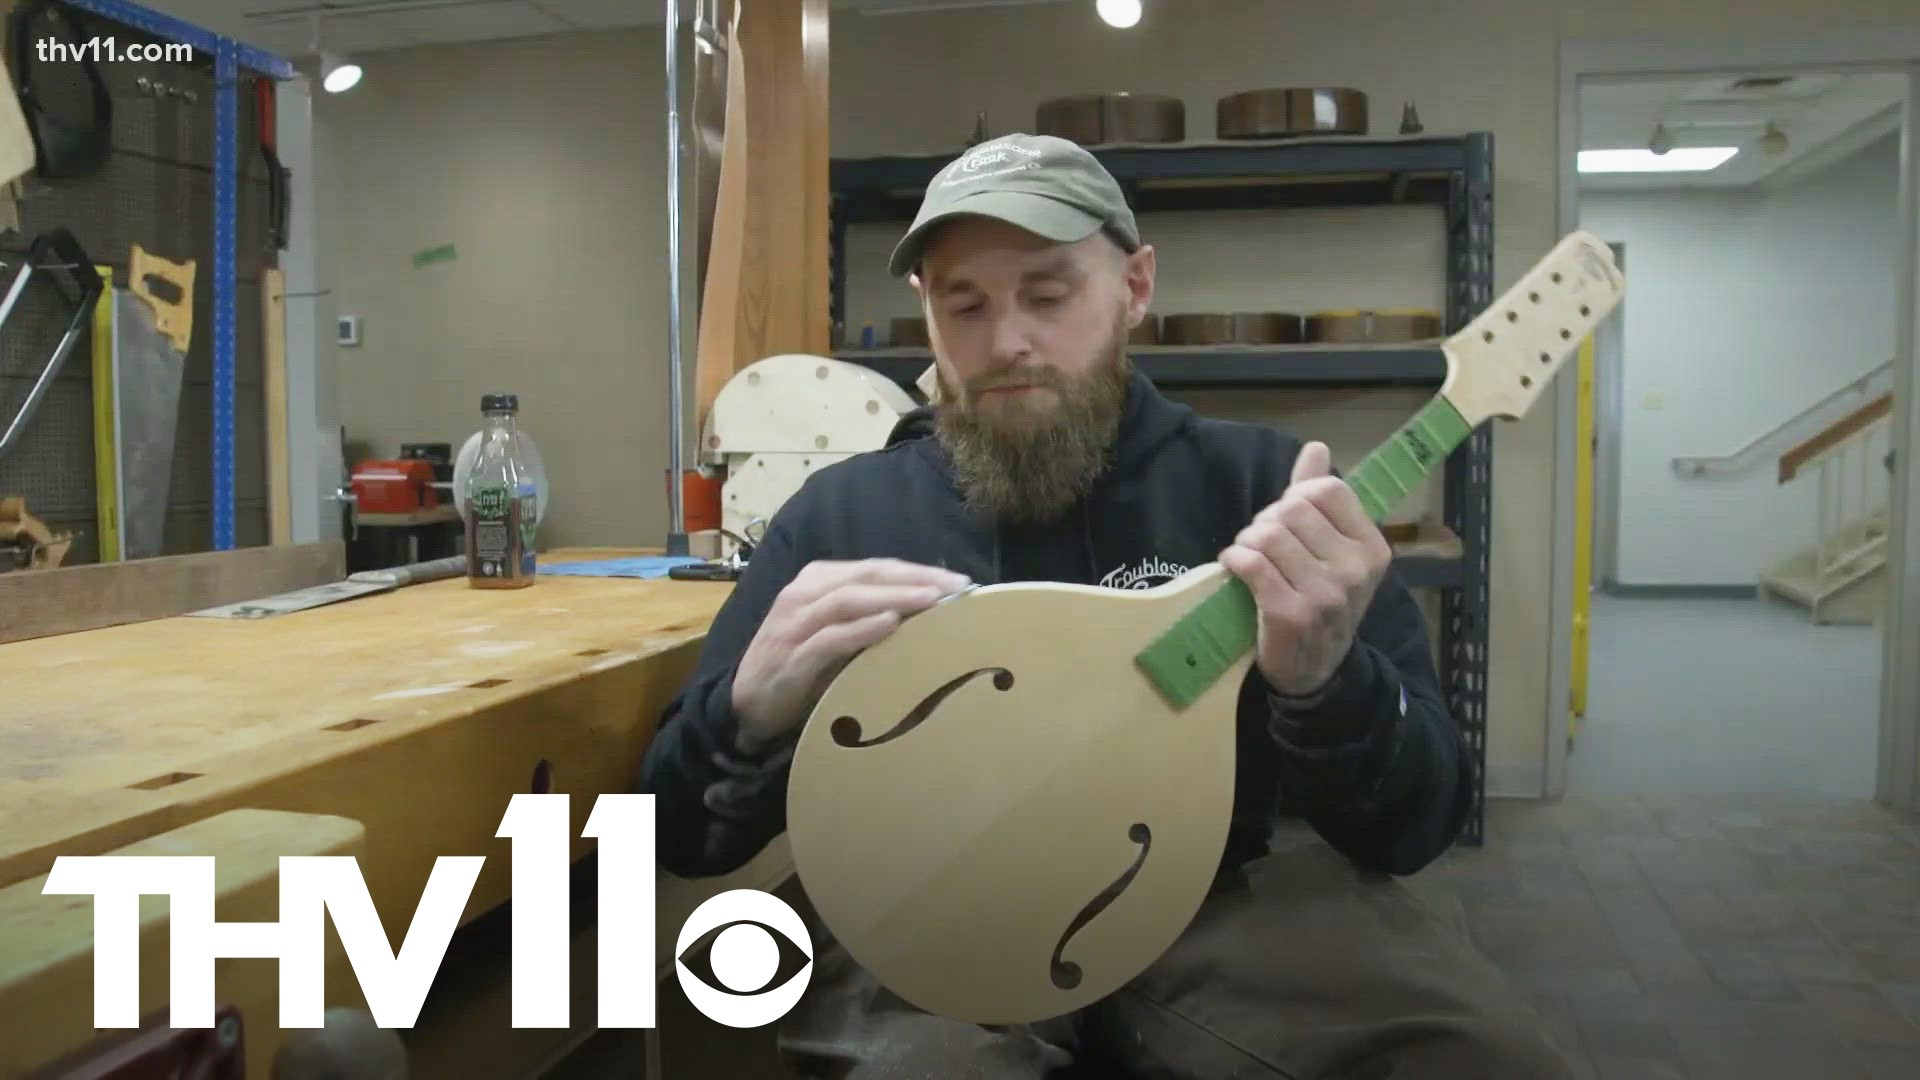 The program teaches addicts woodworking, specifically how to build guitars and how to break with using.